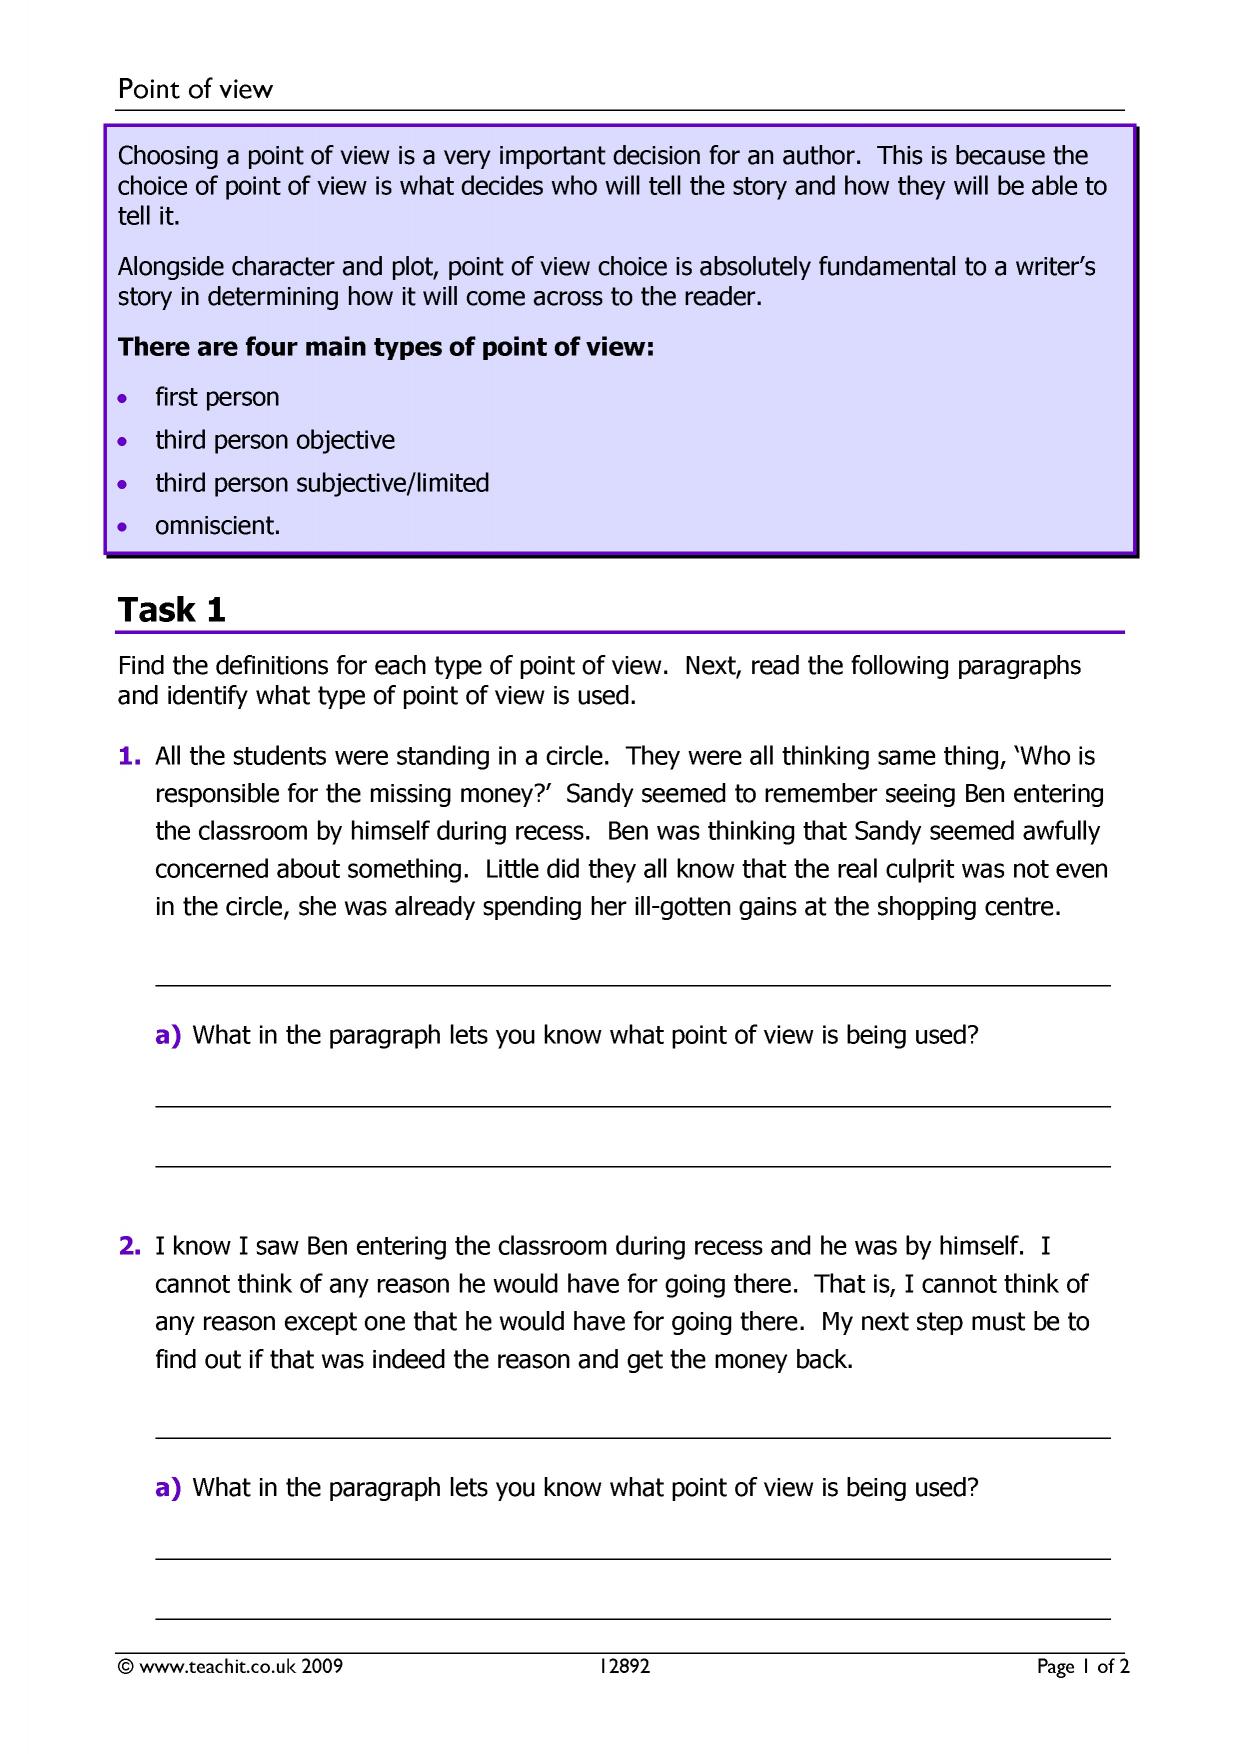 ks4-creative-writing-how-to-get-good-marks-in-creative-writing-in-the-gcse-exam